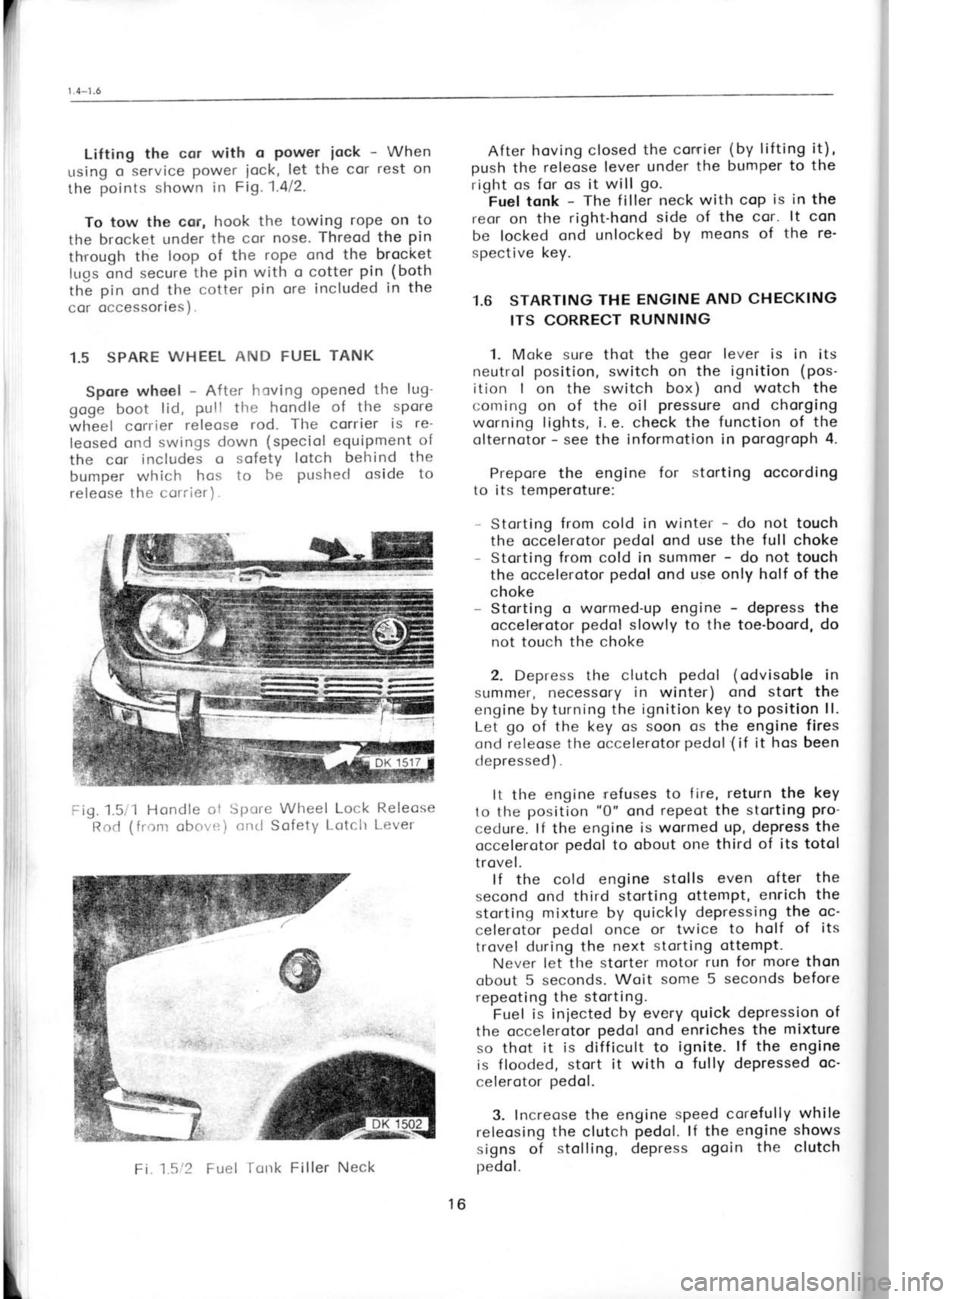 SKODA 120 LS 1980  Workshop Manual Lifting 
the cor with  o 
Power  iock - 
When
r-rsing  o service 
Power iock, let the 
cor rest  on
the  points 
shown  in Fi1.1.412.
To tow  the  cor,  hook the  towing  rope on 
to
the brocket  unde